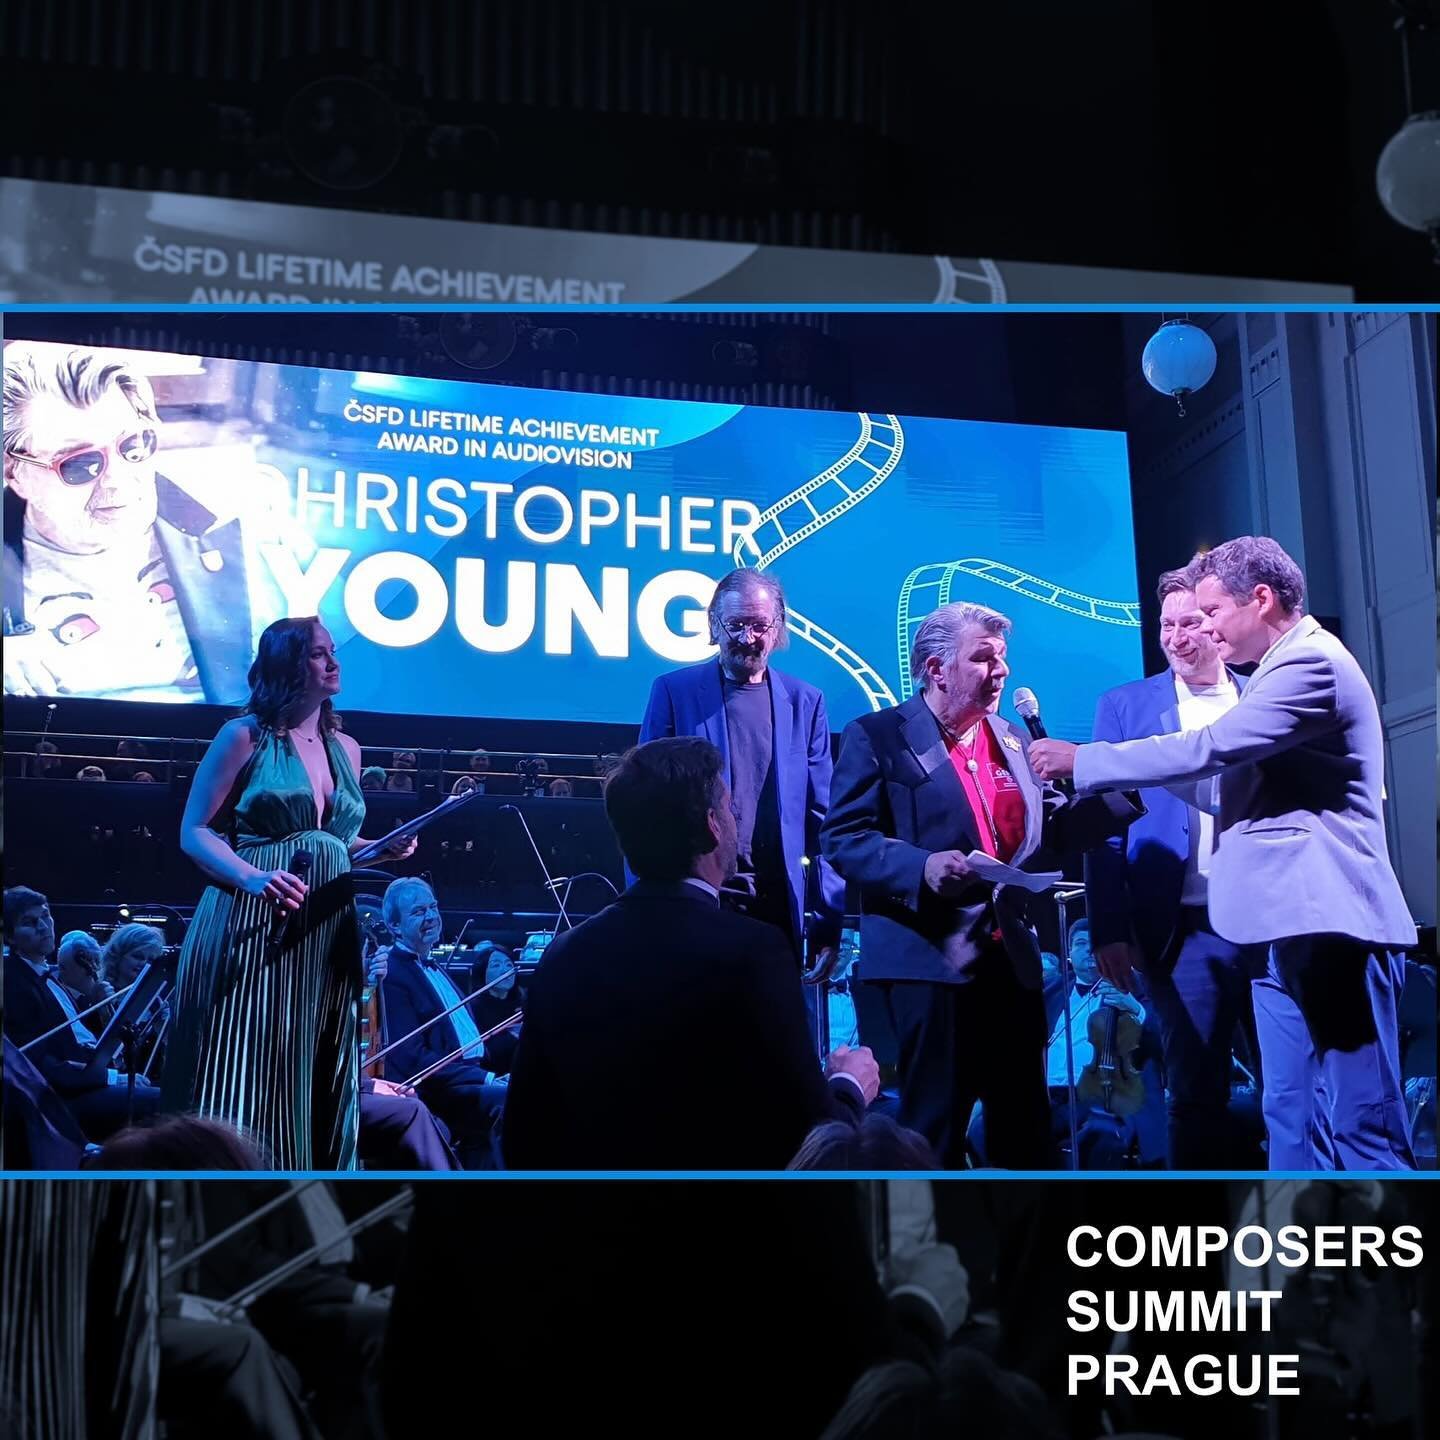 Fans, composers and fellow industry professionals traveled from all over the world to to take part in this years Composers Summit in Prague. Our Emmy &amp; Golden Globe nominated &amp; BMI award-winning client, Christopher Young, was a special guest 